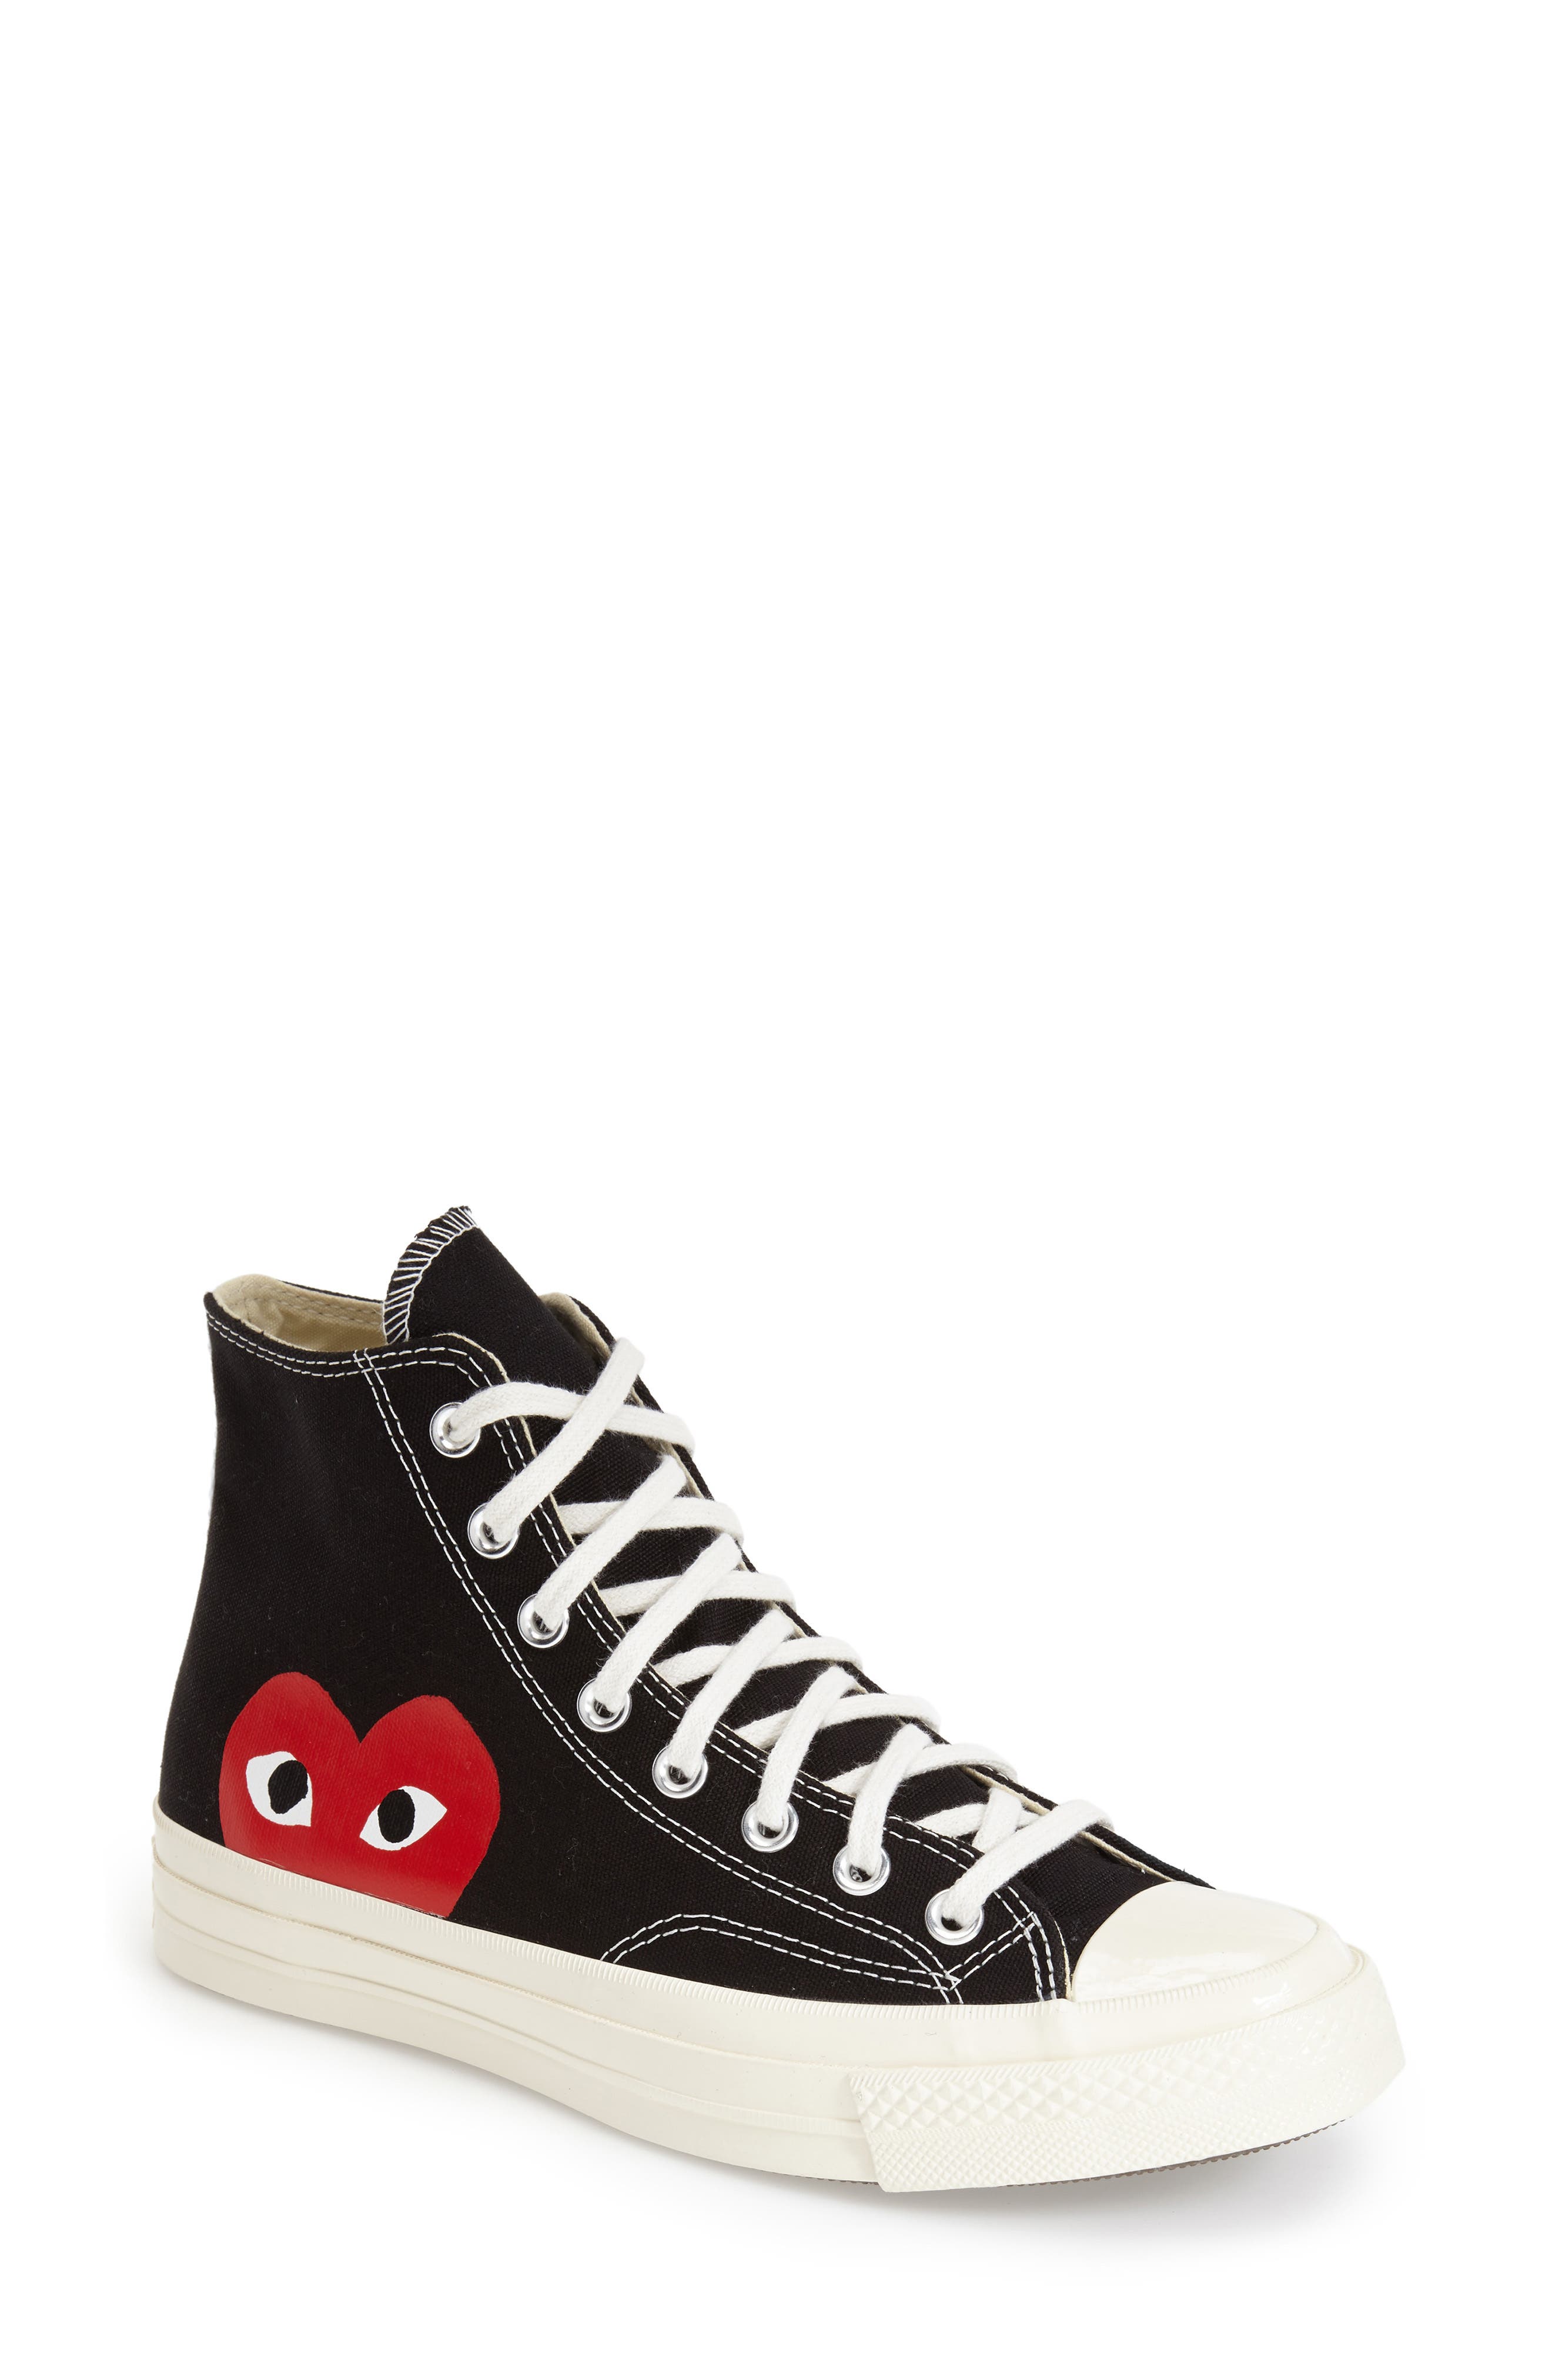 converse all star red heart 